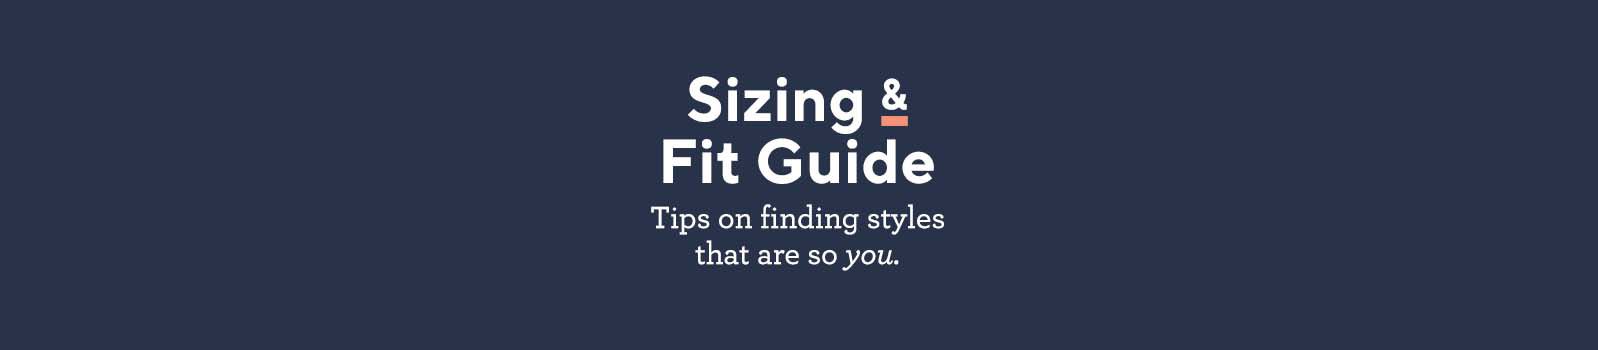 Sizing & Fit Guide.  Tips on finding styles that are so you.